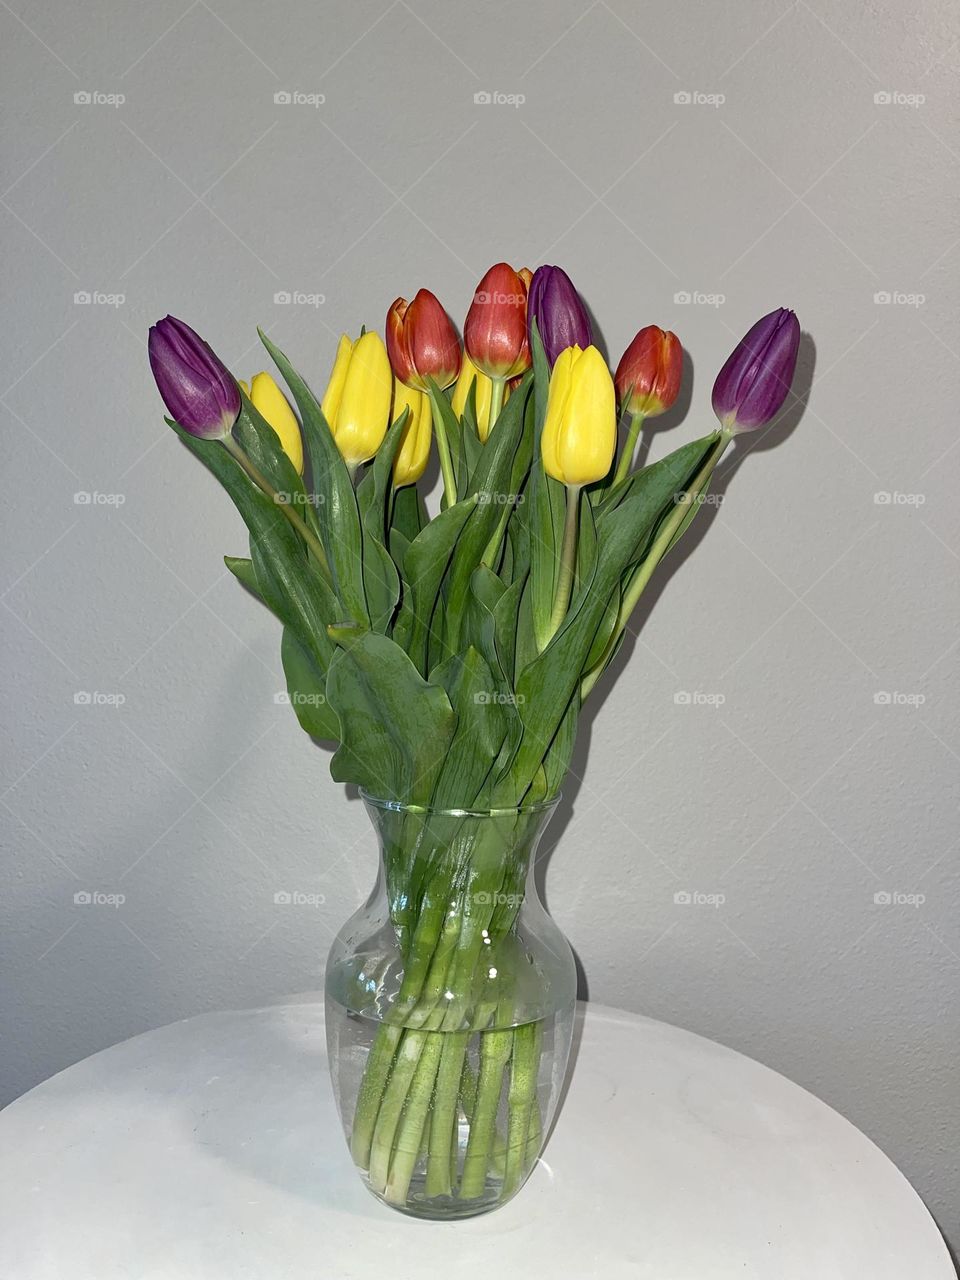 Colourful tulips in the glass vase 